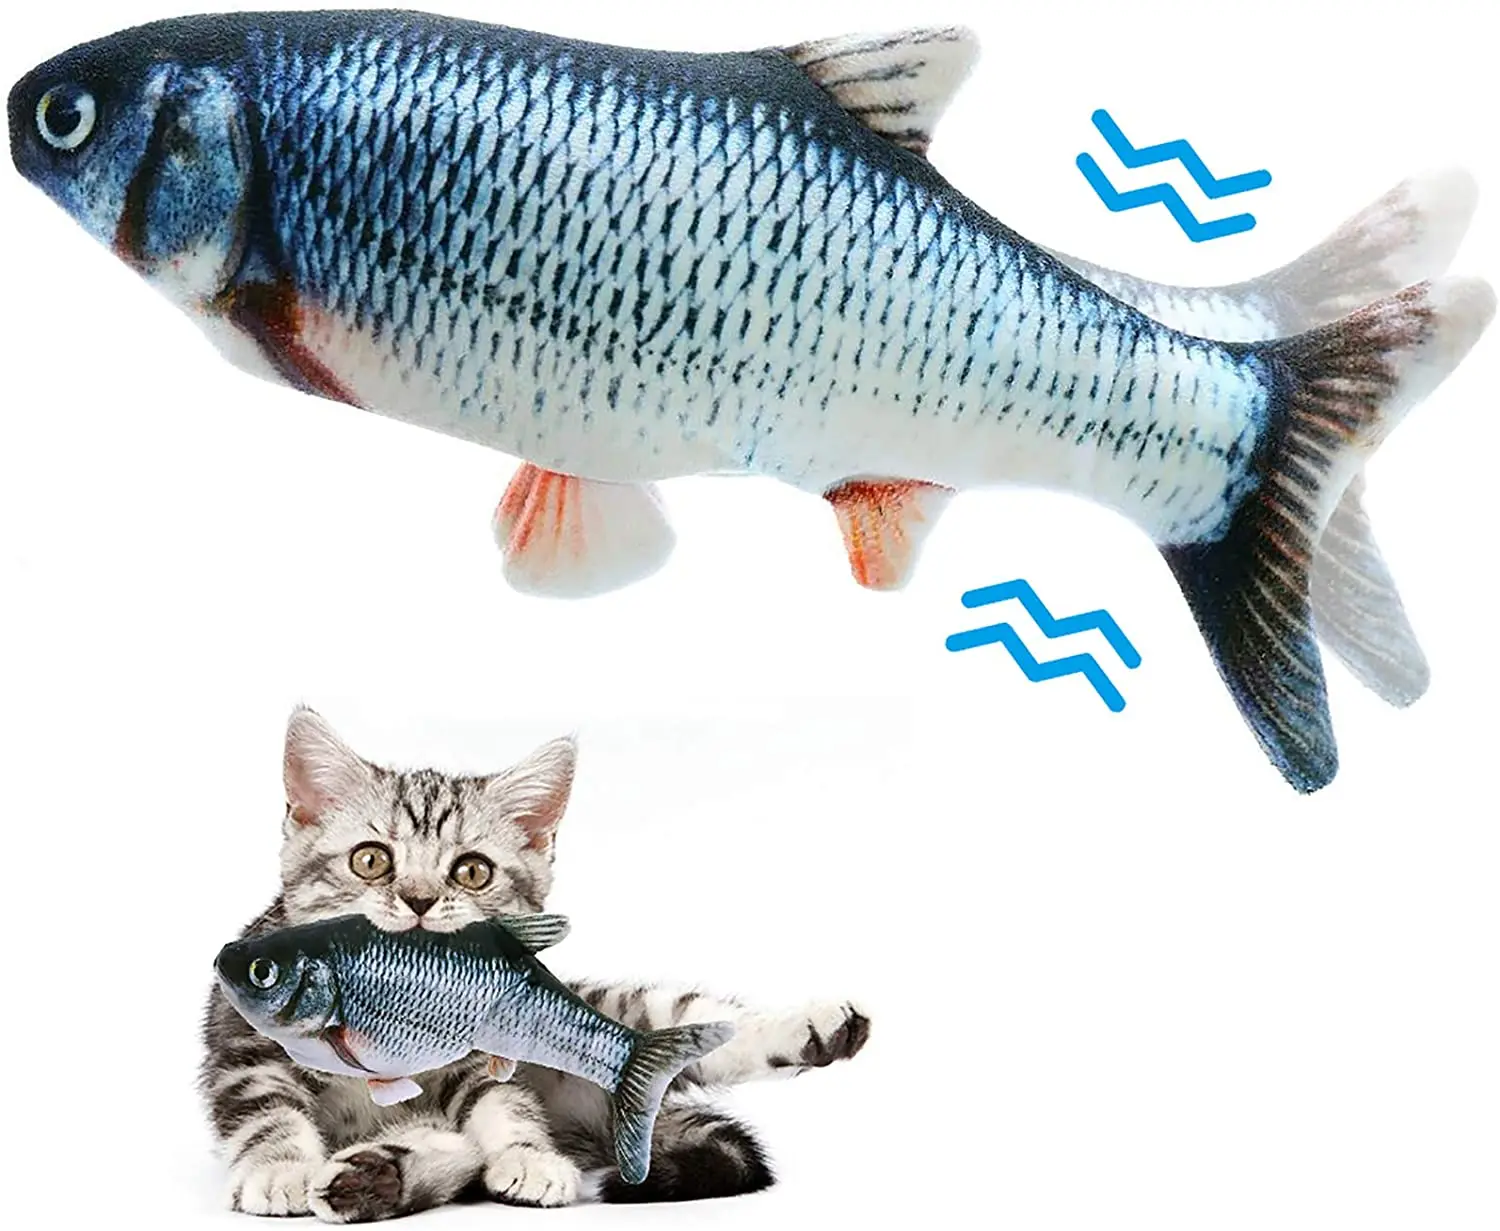 MOGOI Realistic Plush Simulation Electric Doll Fish,Cat Kicker Fish Toy,Cat Wagging Fish Toys,Funny Interactive Pets Chew Bite Supplies Fish Flop Cat Toy Catnip Toys for Biting,Chewing and Kicking,A 